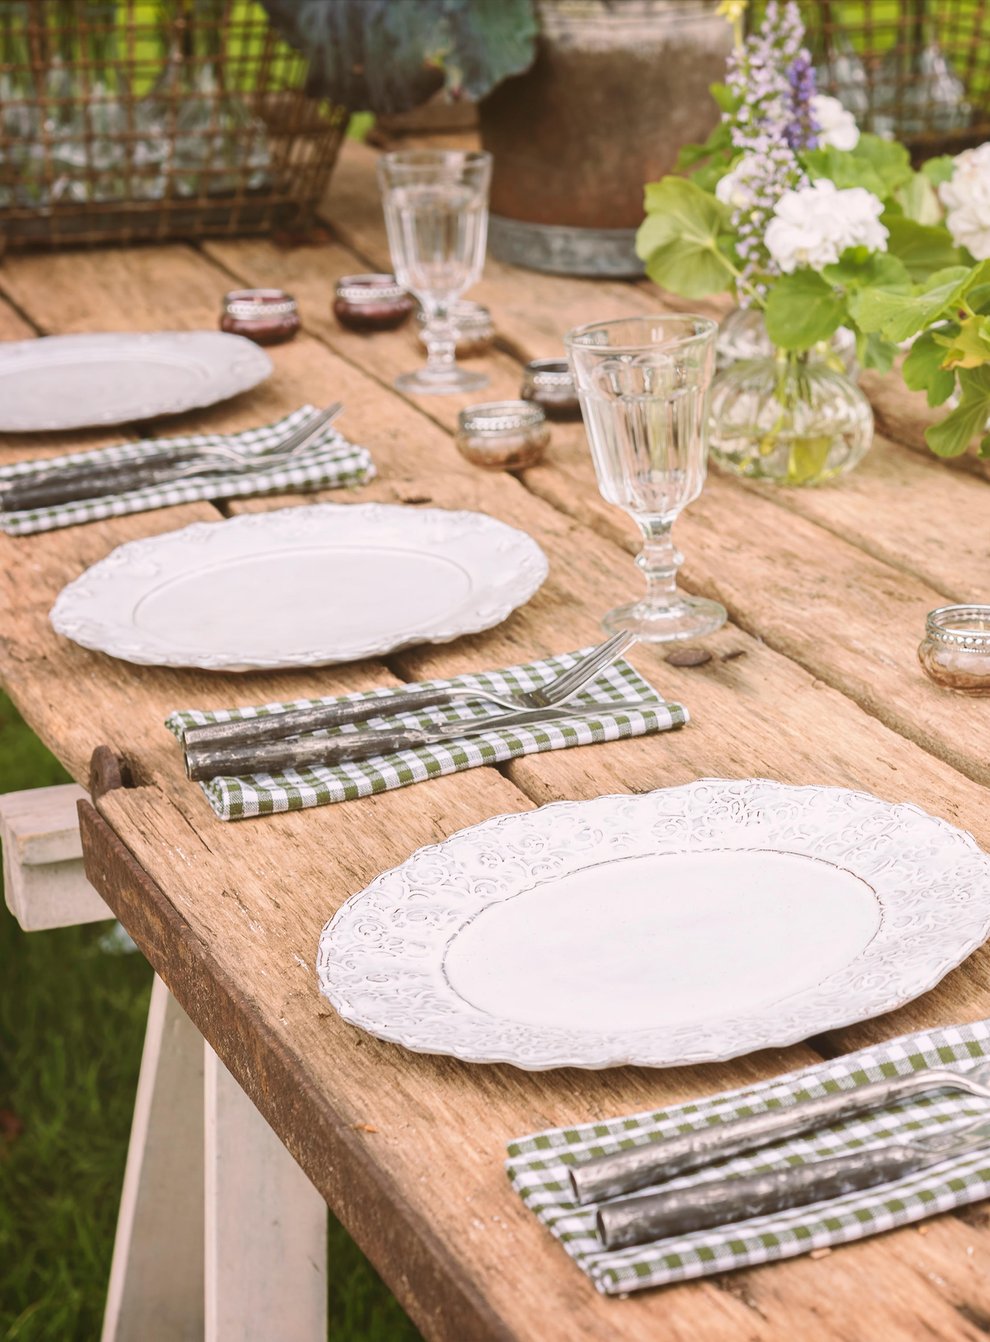 Wooden table set up for a garden party